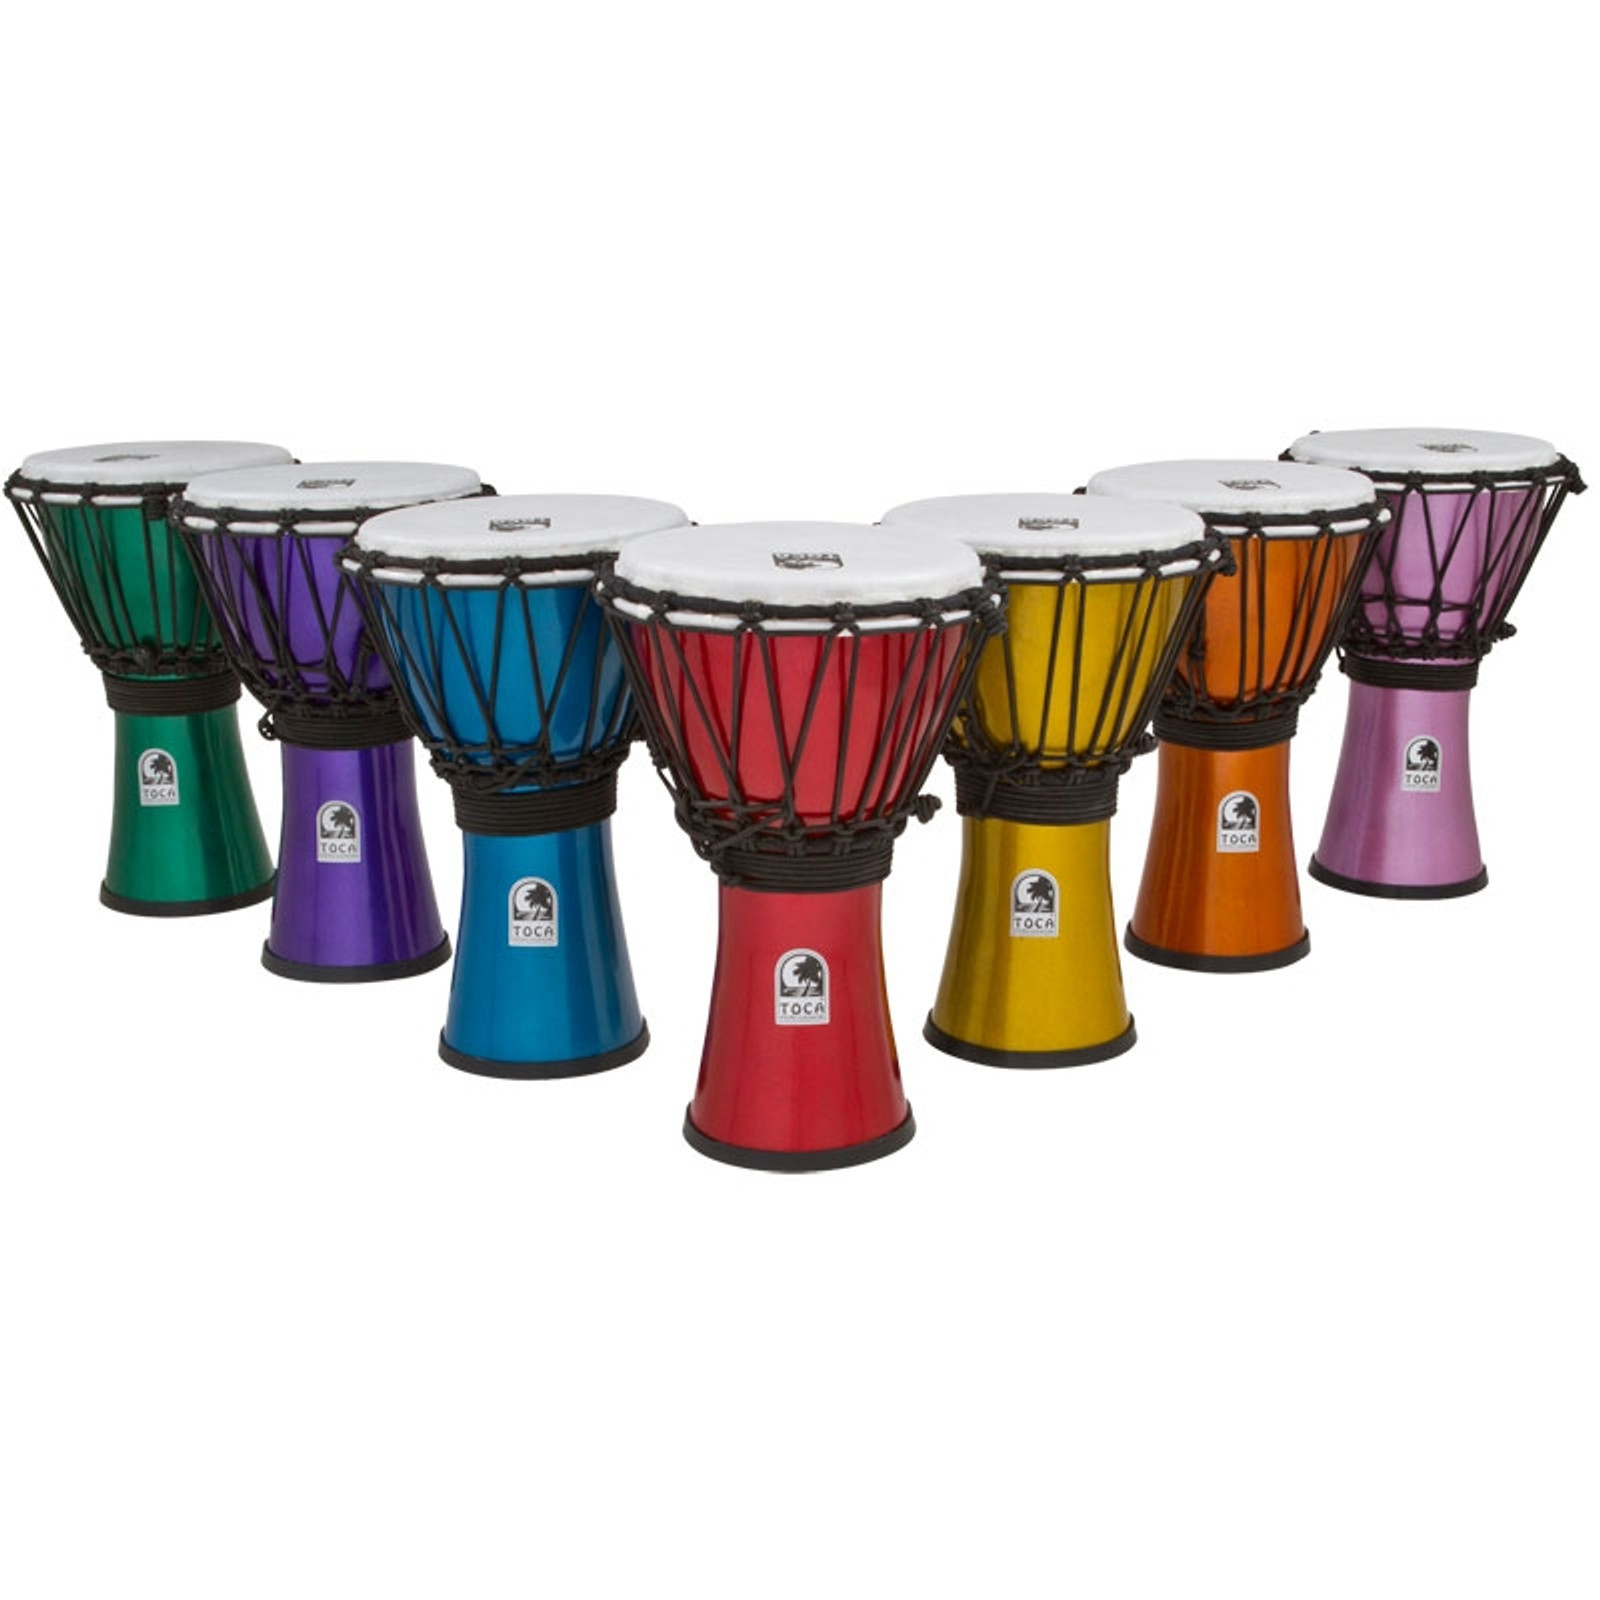 Toca Freestyle ColorSound Djembes, Set of 7 Colors